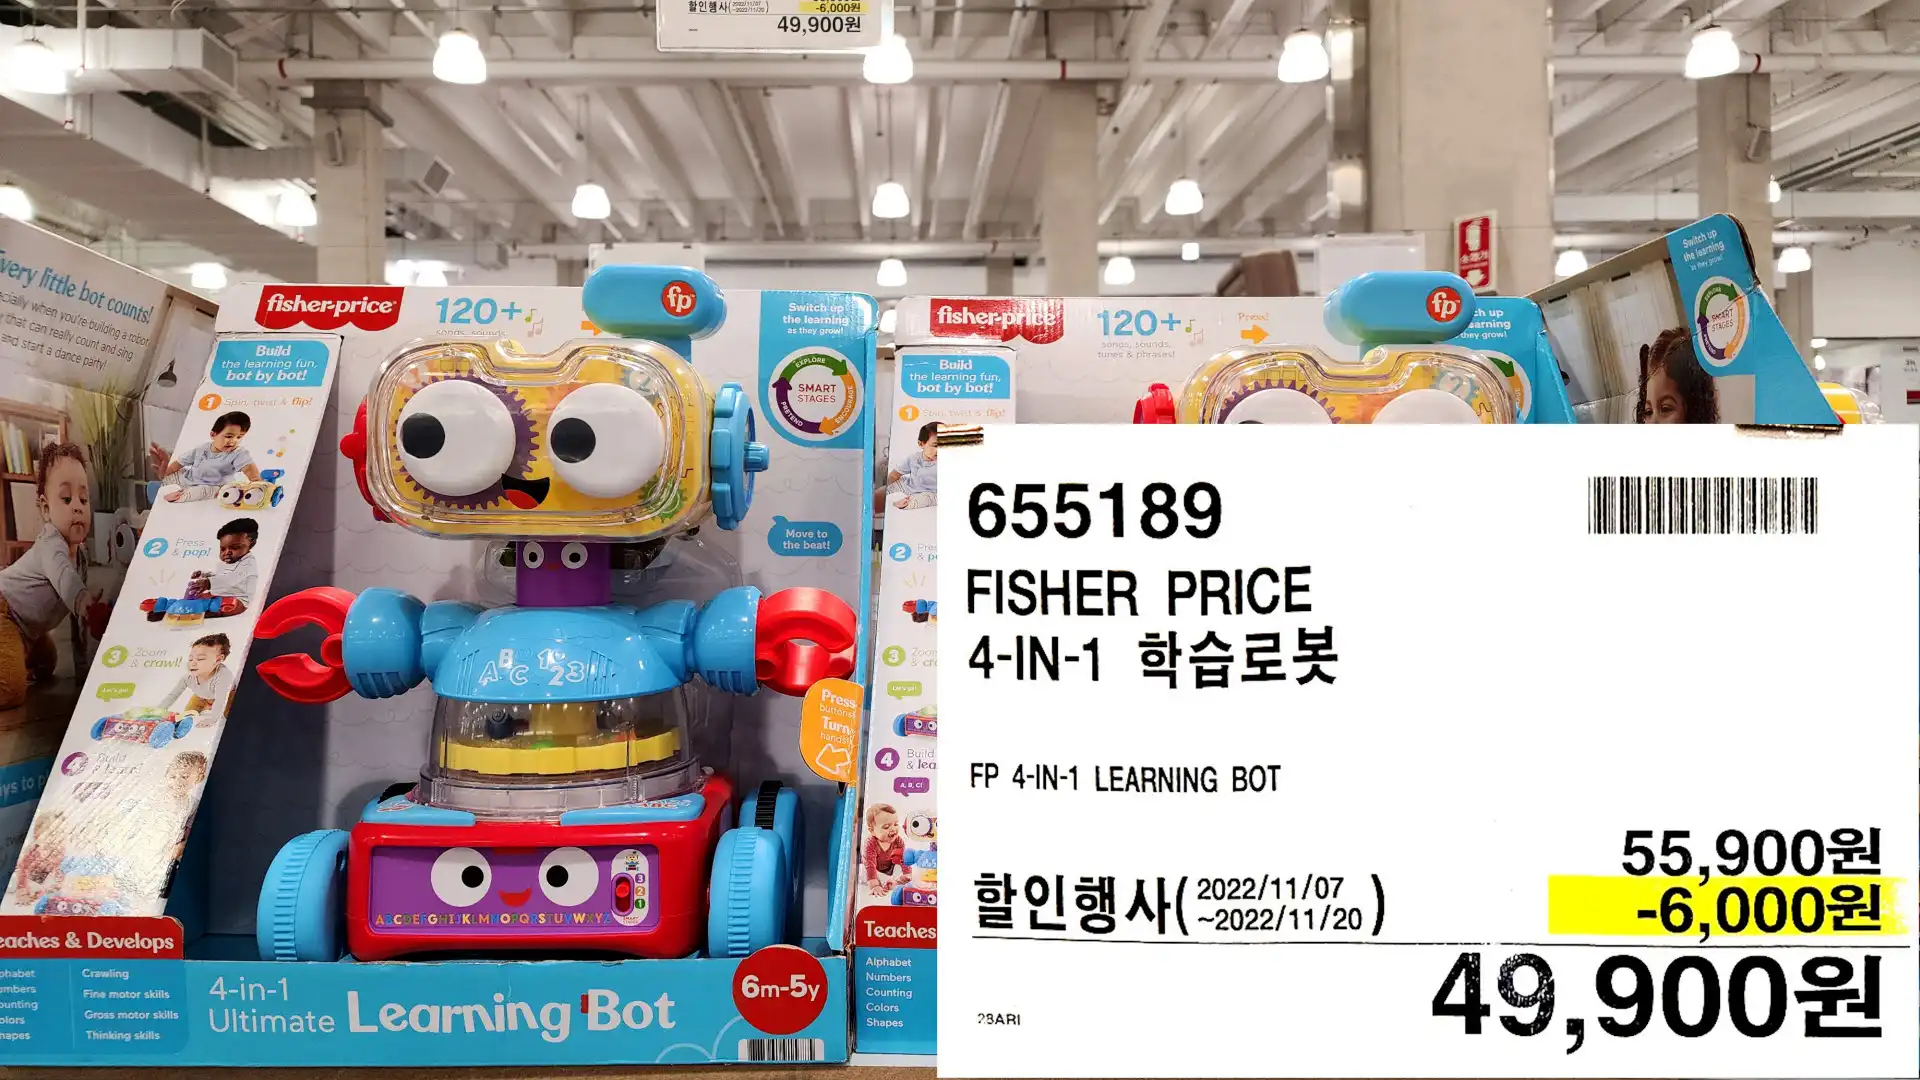 FISHER PRICE
4-IN-1 학습로봇
FP 4-IN-1 LEARNING BOT
49&#44;900원